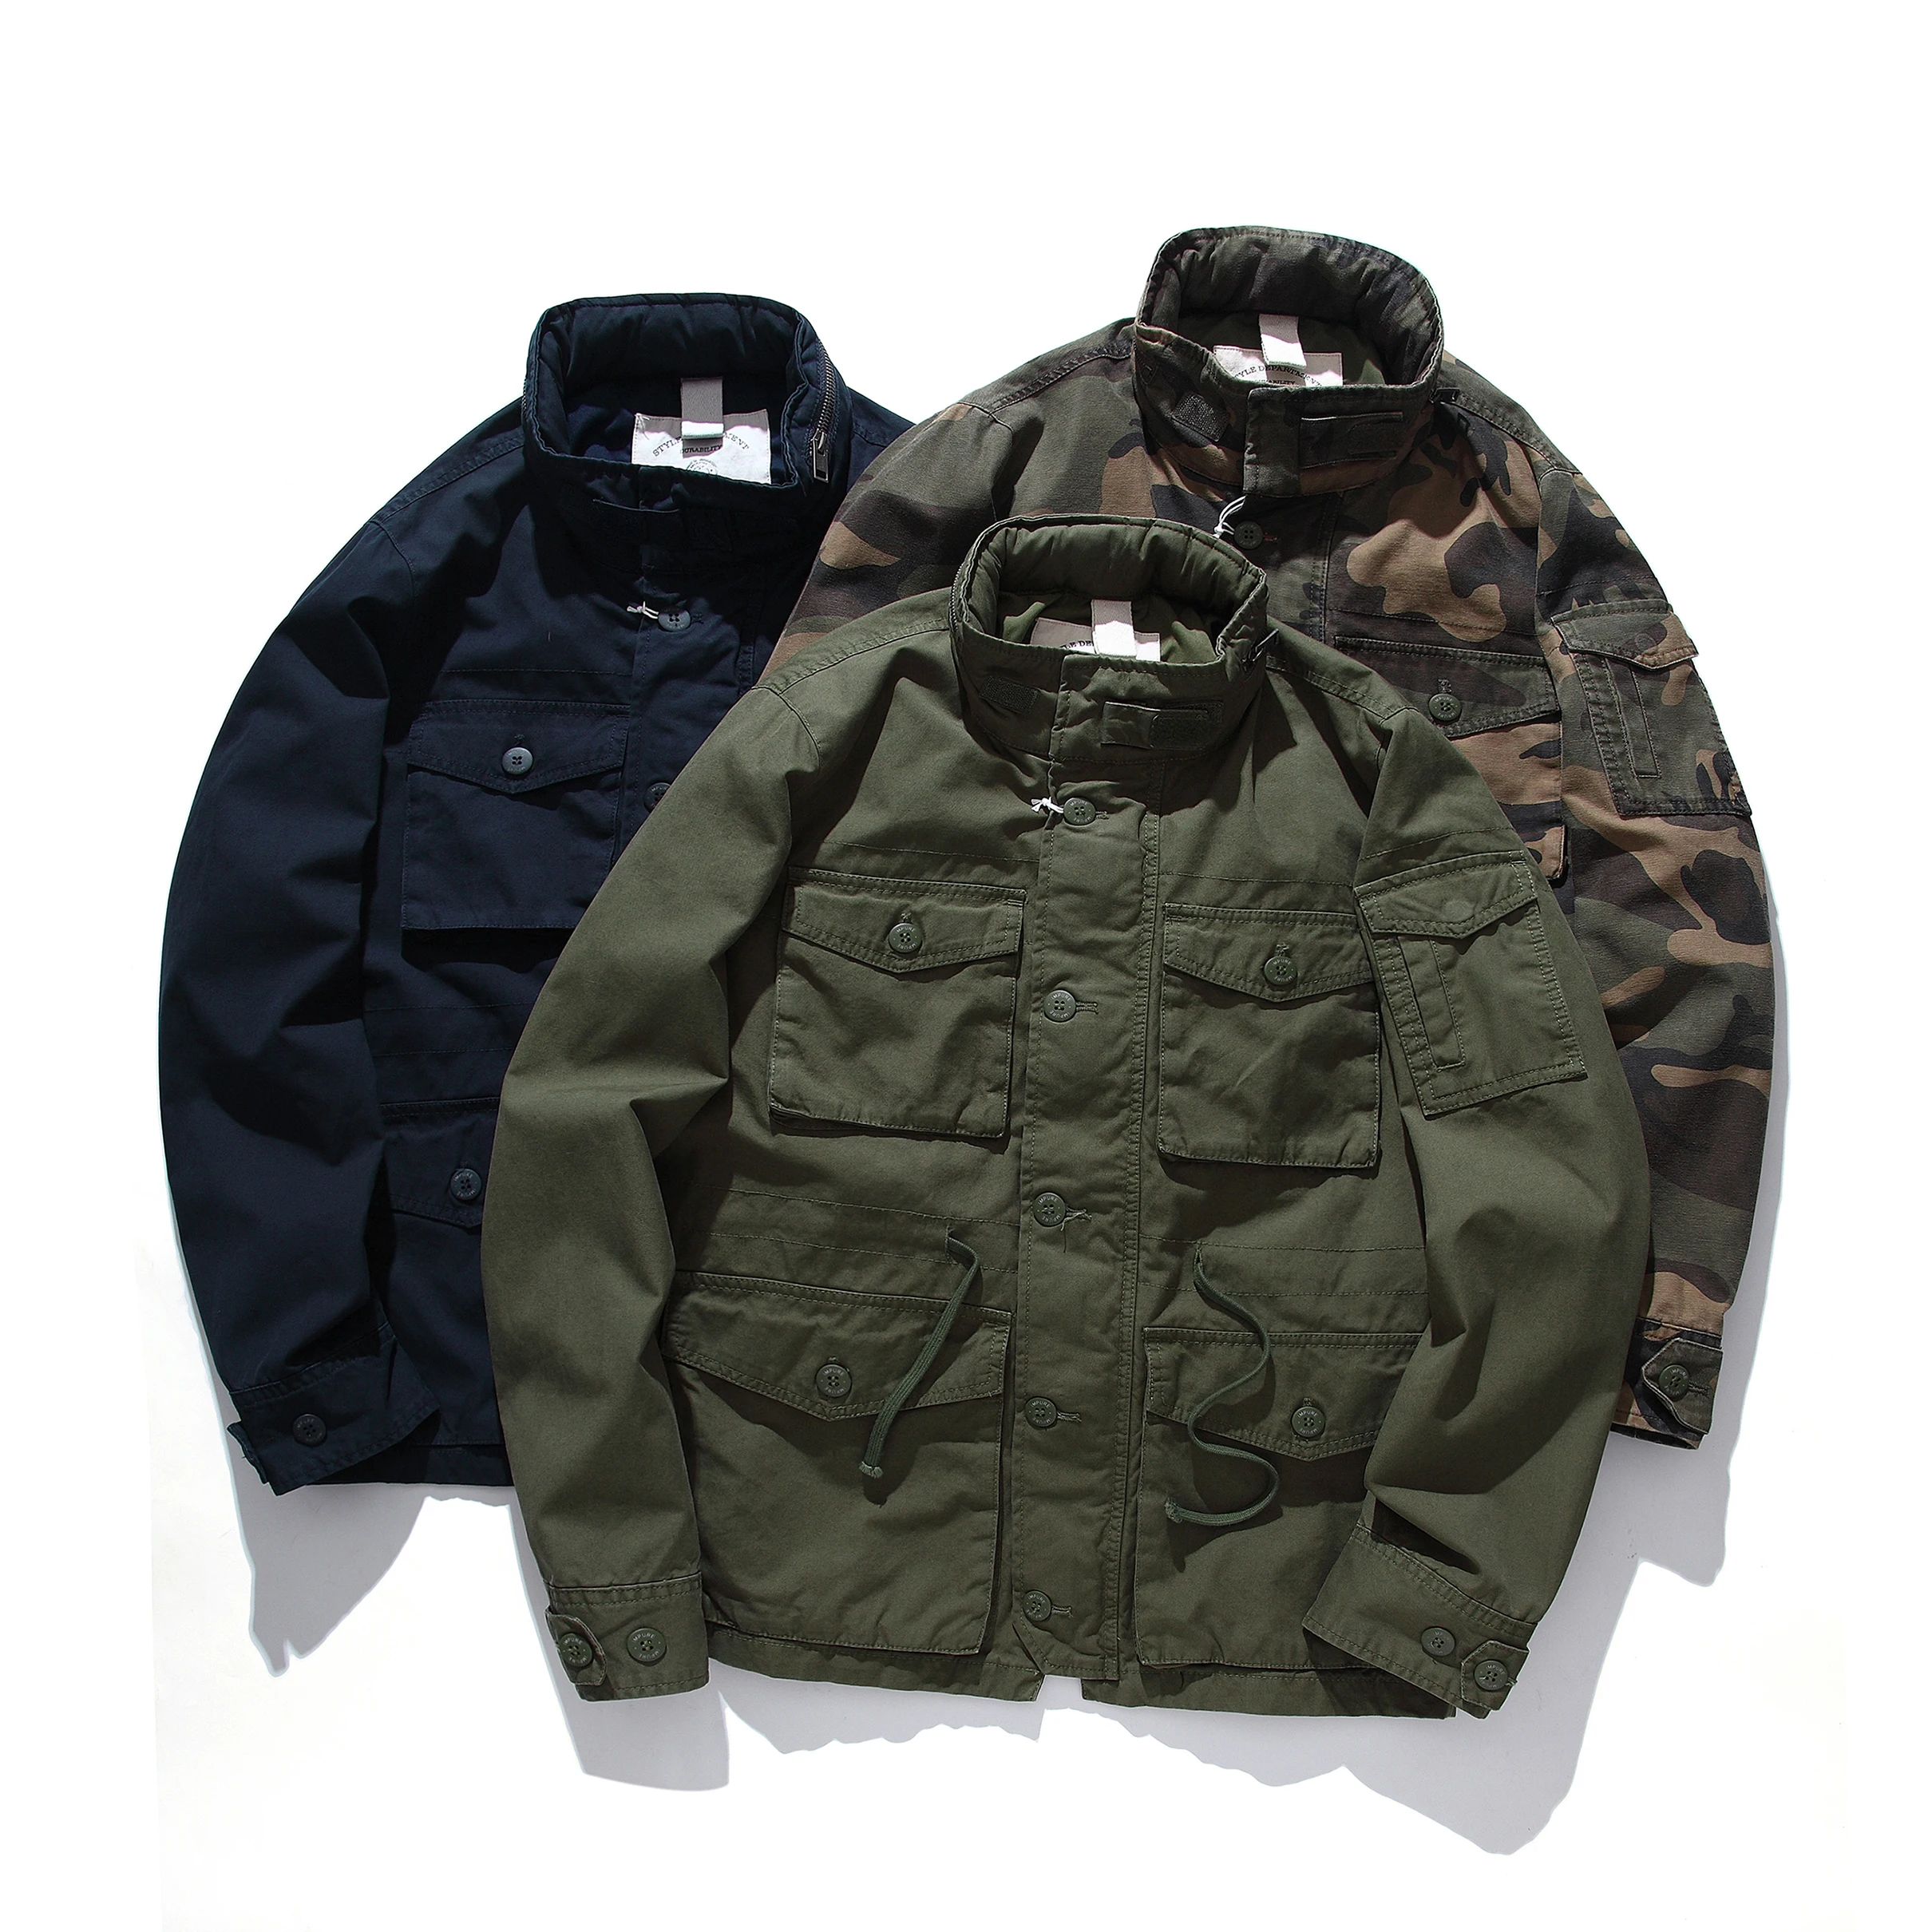 American solid color retro do old washed camouflage tooling pocket hooded jacket tide brand military windbreaker jacket